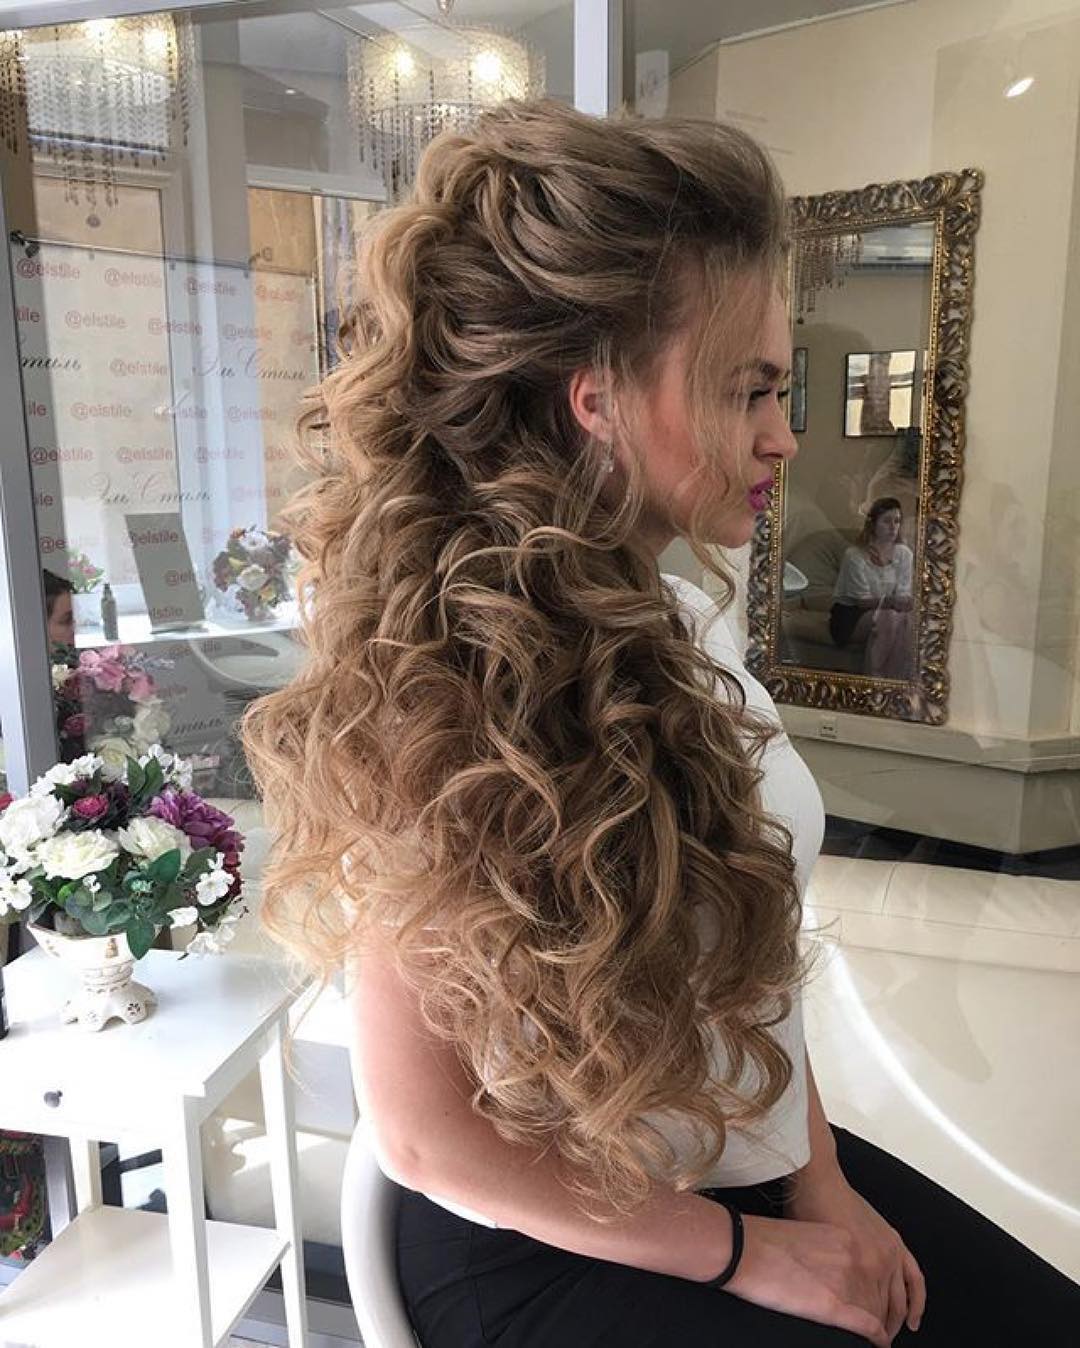 Wedding hairstyles for long hair: Half Up, Half Down | LadyLife